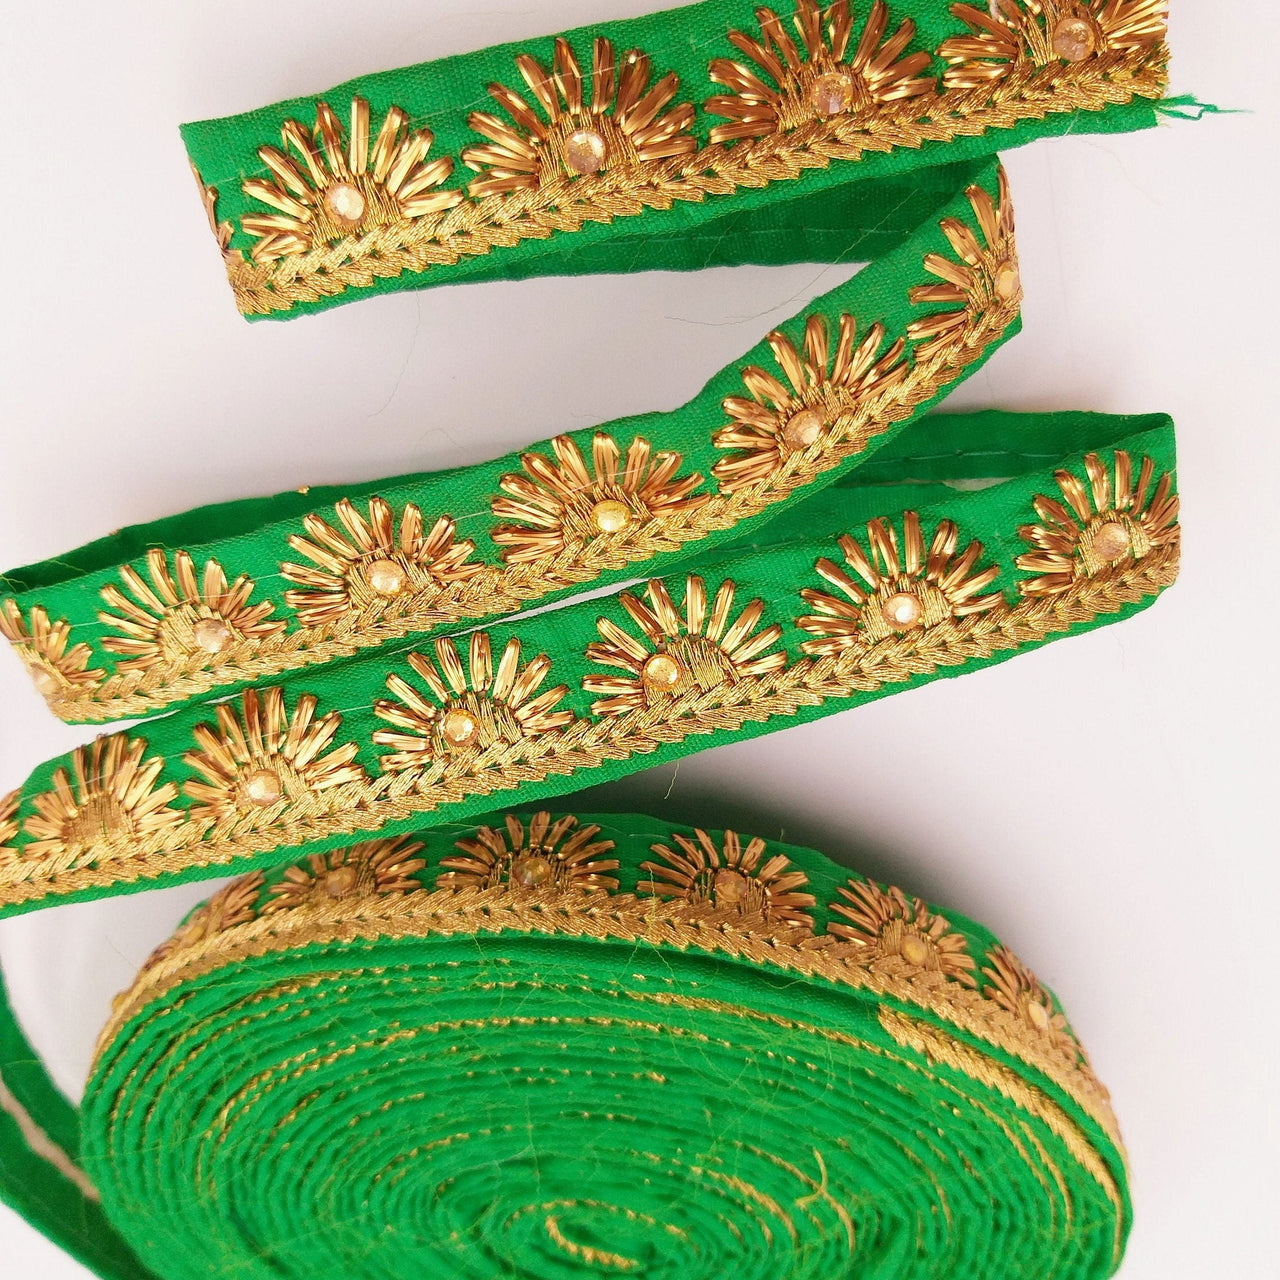 Embroidered Green Silk Trim With Gold Embroidery, Lace Trim By 2 Yard, Decorative Trimming